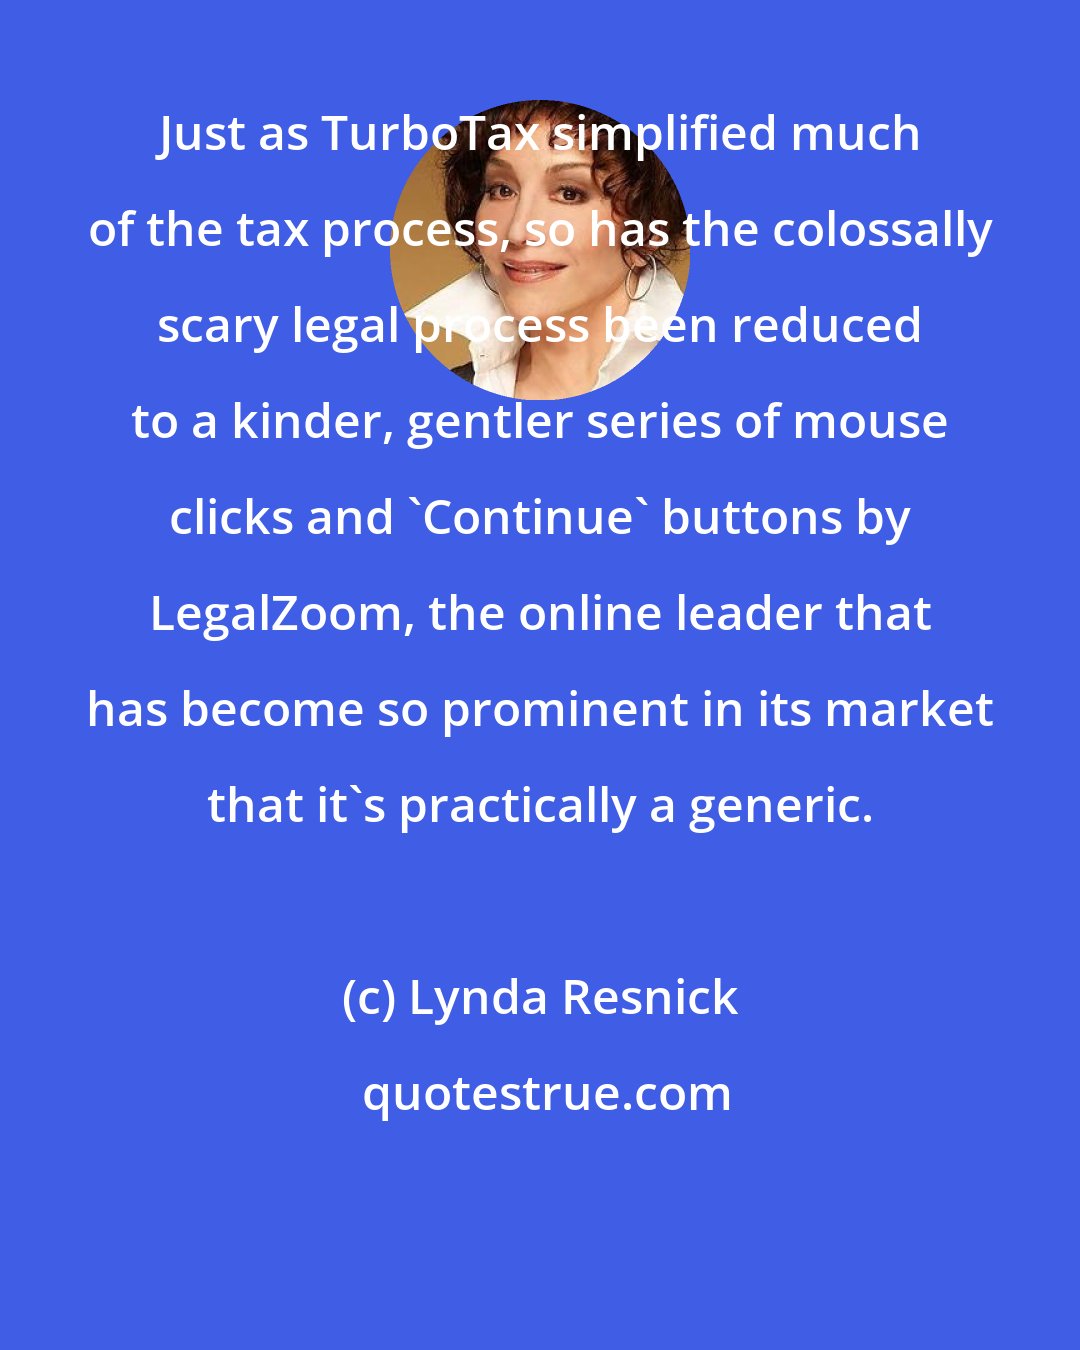 Lynda Resnick: Just as TurboTax simplified much of the tax process, so has the colossally scary legal process been reduced to a kinder, gentler series of mouse clicks and 'Continue' buttons by LegalZoom, the online leader that has become so prominent in its market that it's practically a generic.